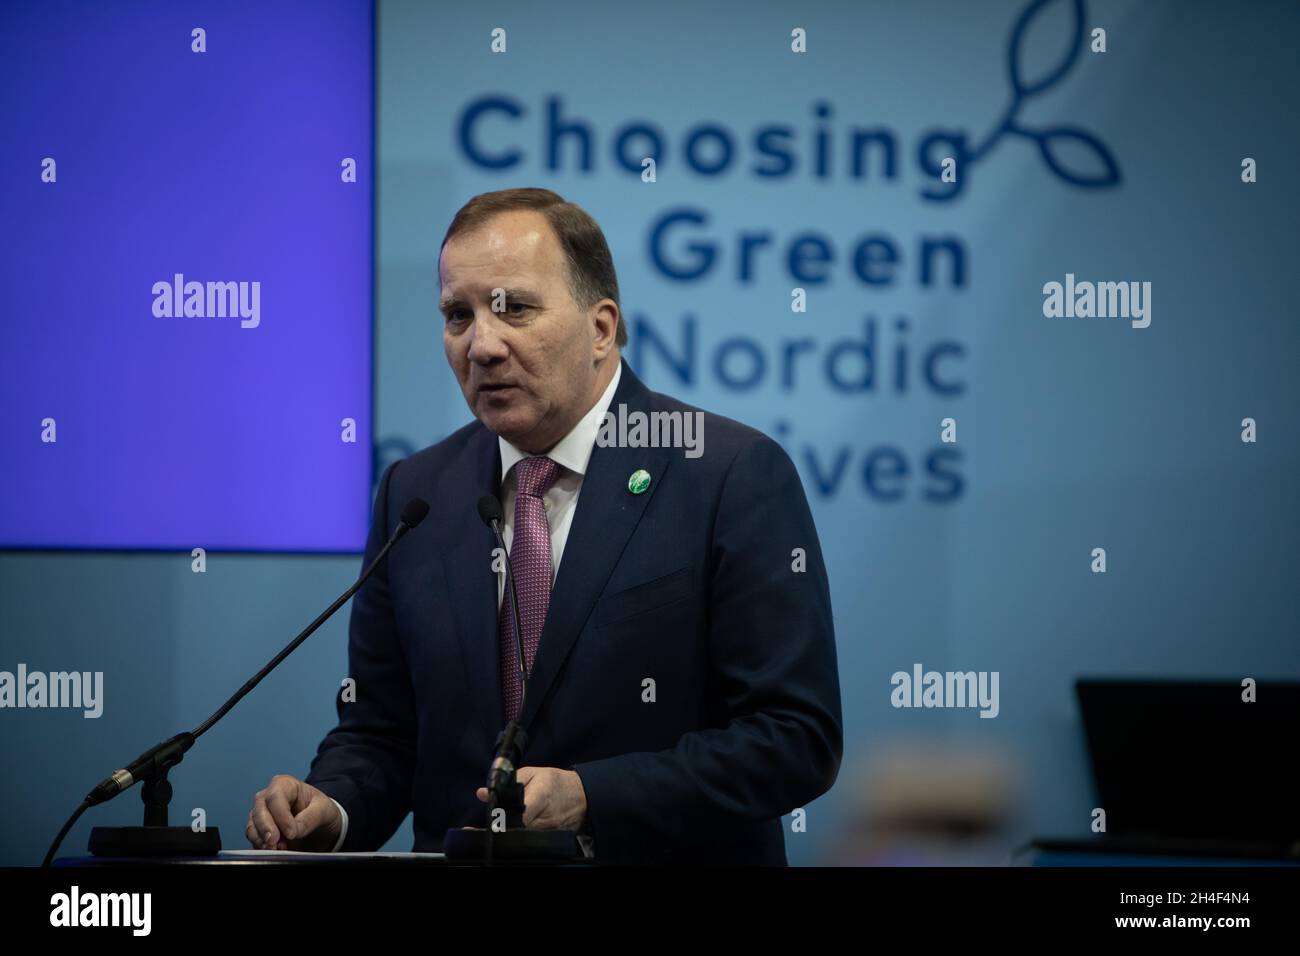 Glasgow, UK. Stefan Löfven, Prime Minister of Sweden, speaking at a Nordic Countries meeting, at the 26th UN Climate Change Conference, known as COP26, in Glasgow, Scotland, on 2 November 2021. Photo: Jeremy Sutton-Hibbert/Alamy Live News, Stock Photo